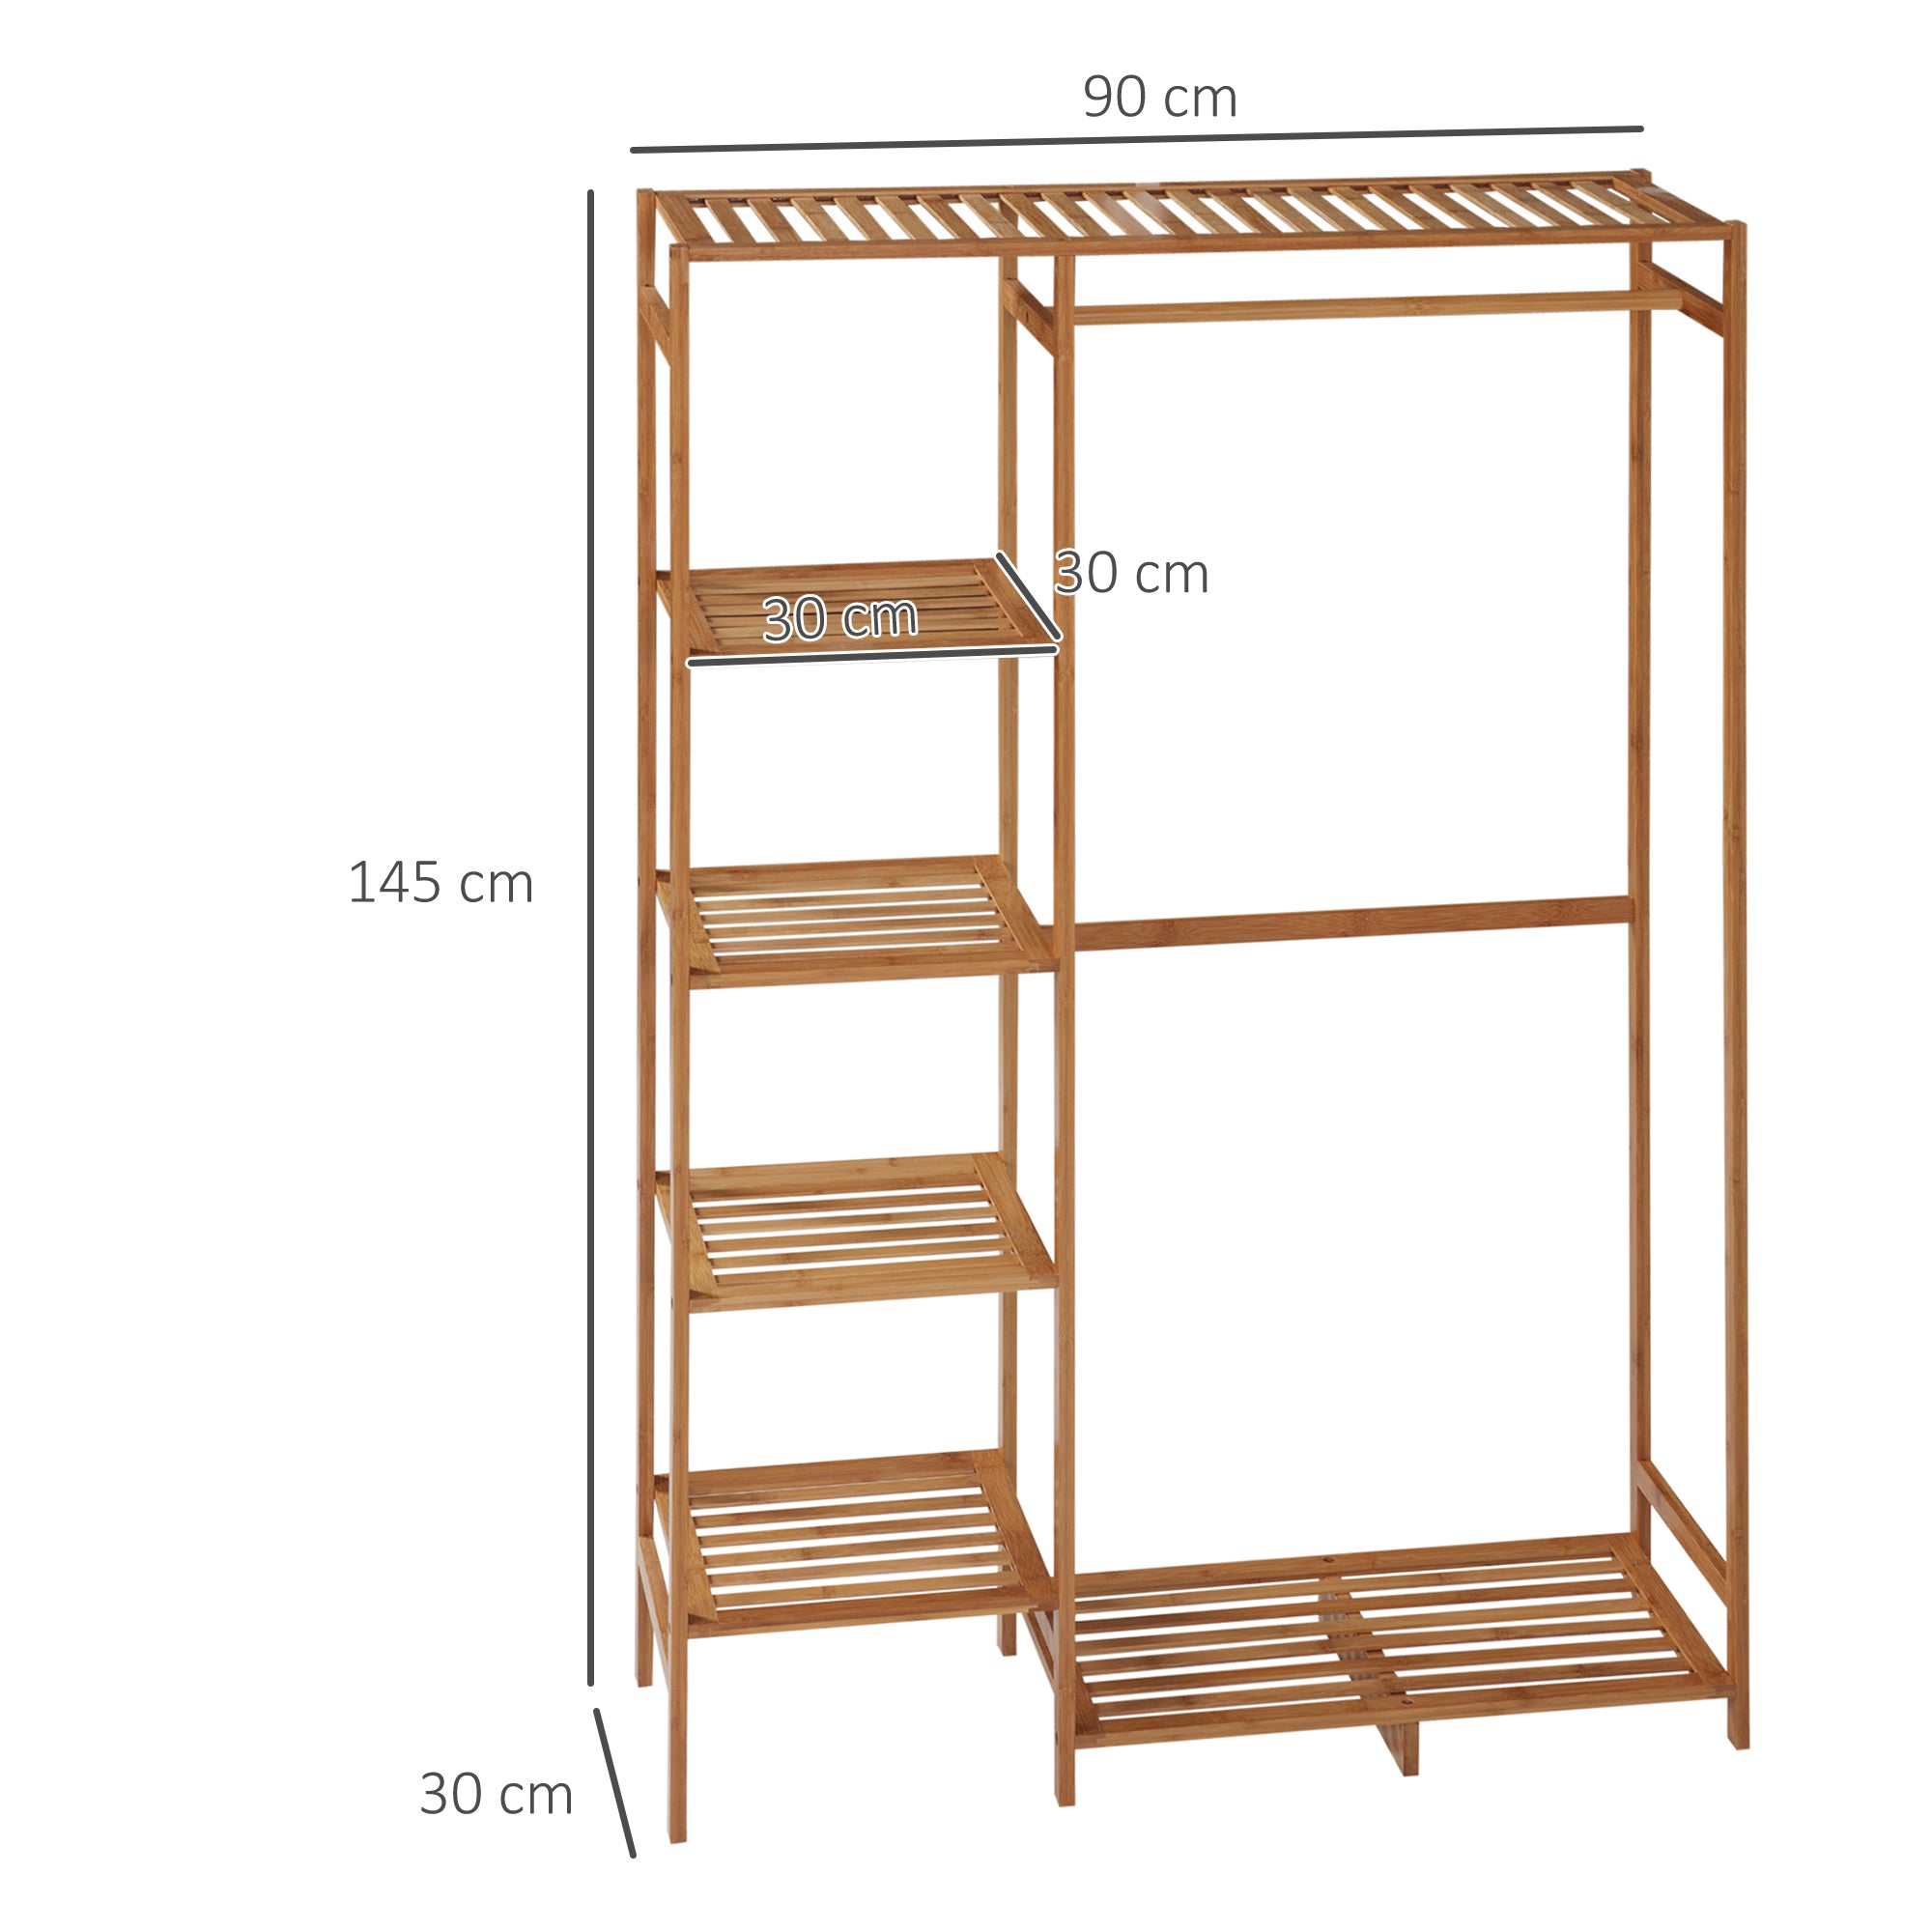 HOMCOM Bamboo Clothes Rack for Bedroom Garment Rack with 6-Tier Storage Shelf Hanging Rod Clothes Rail for Living Room Entryway